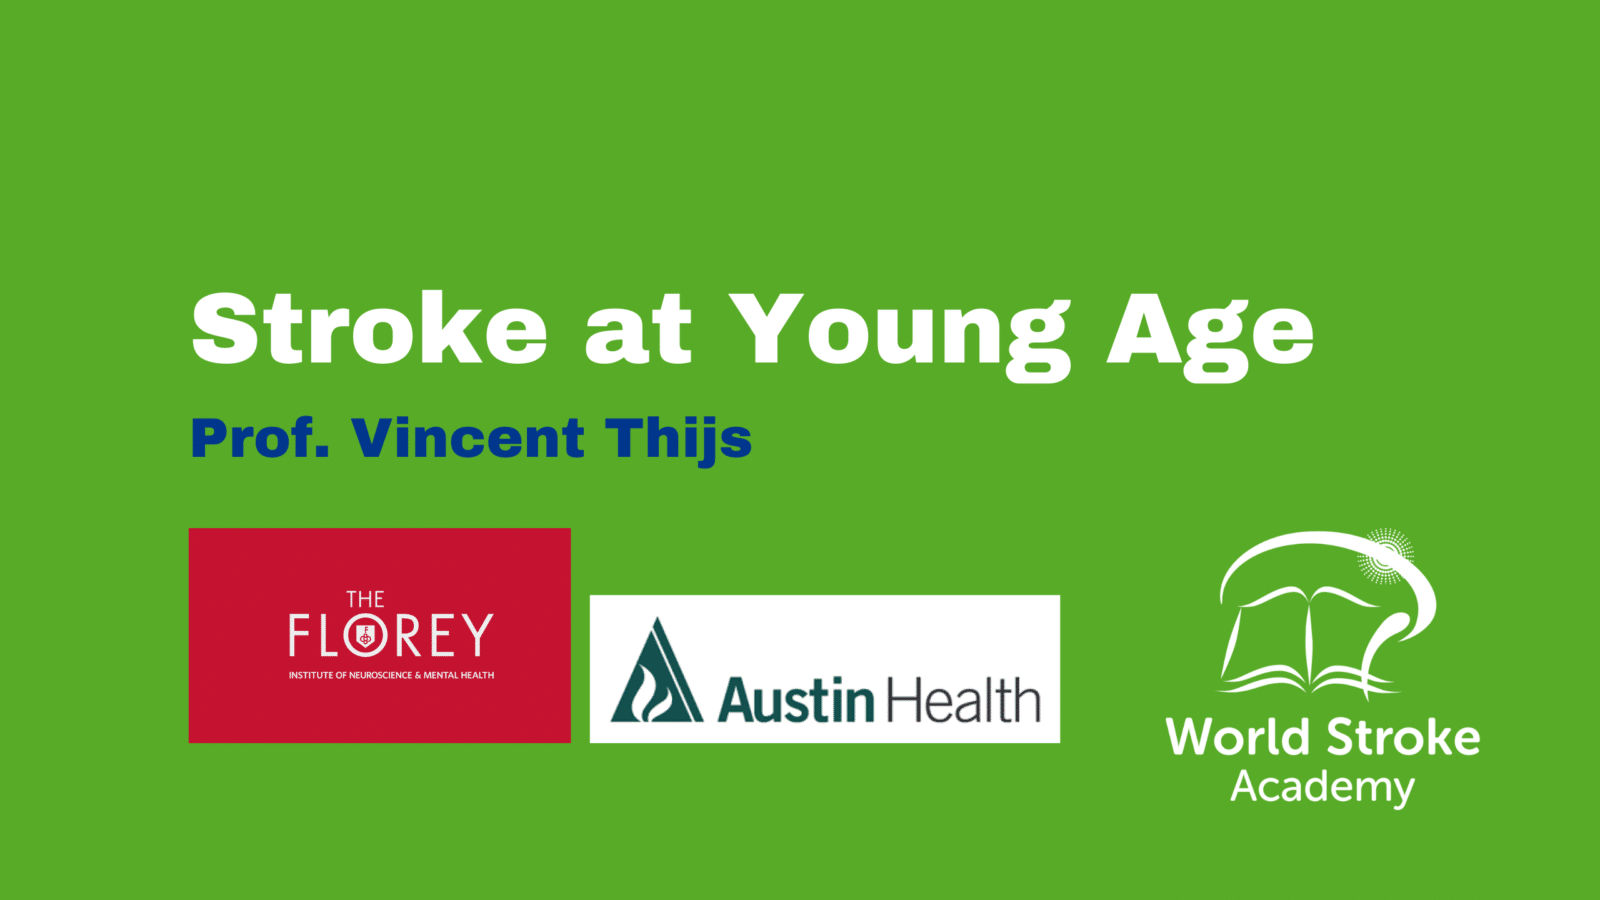 Case Study – Stroke at Young Age